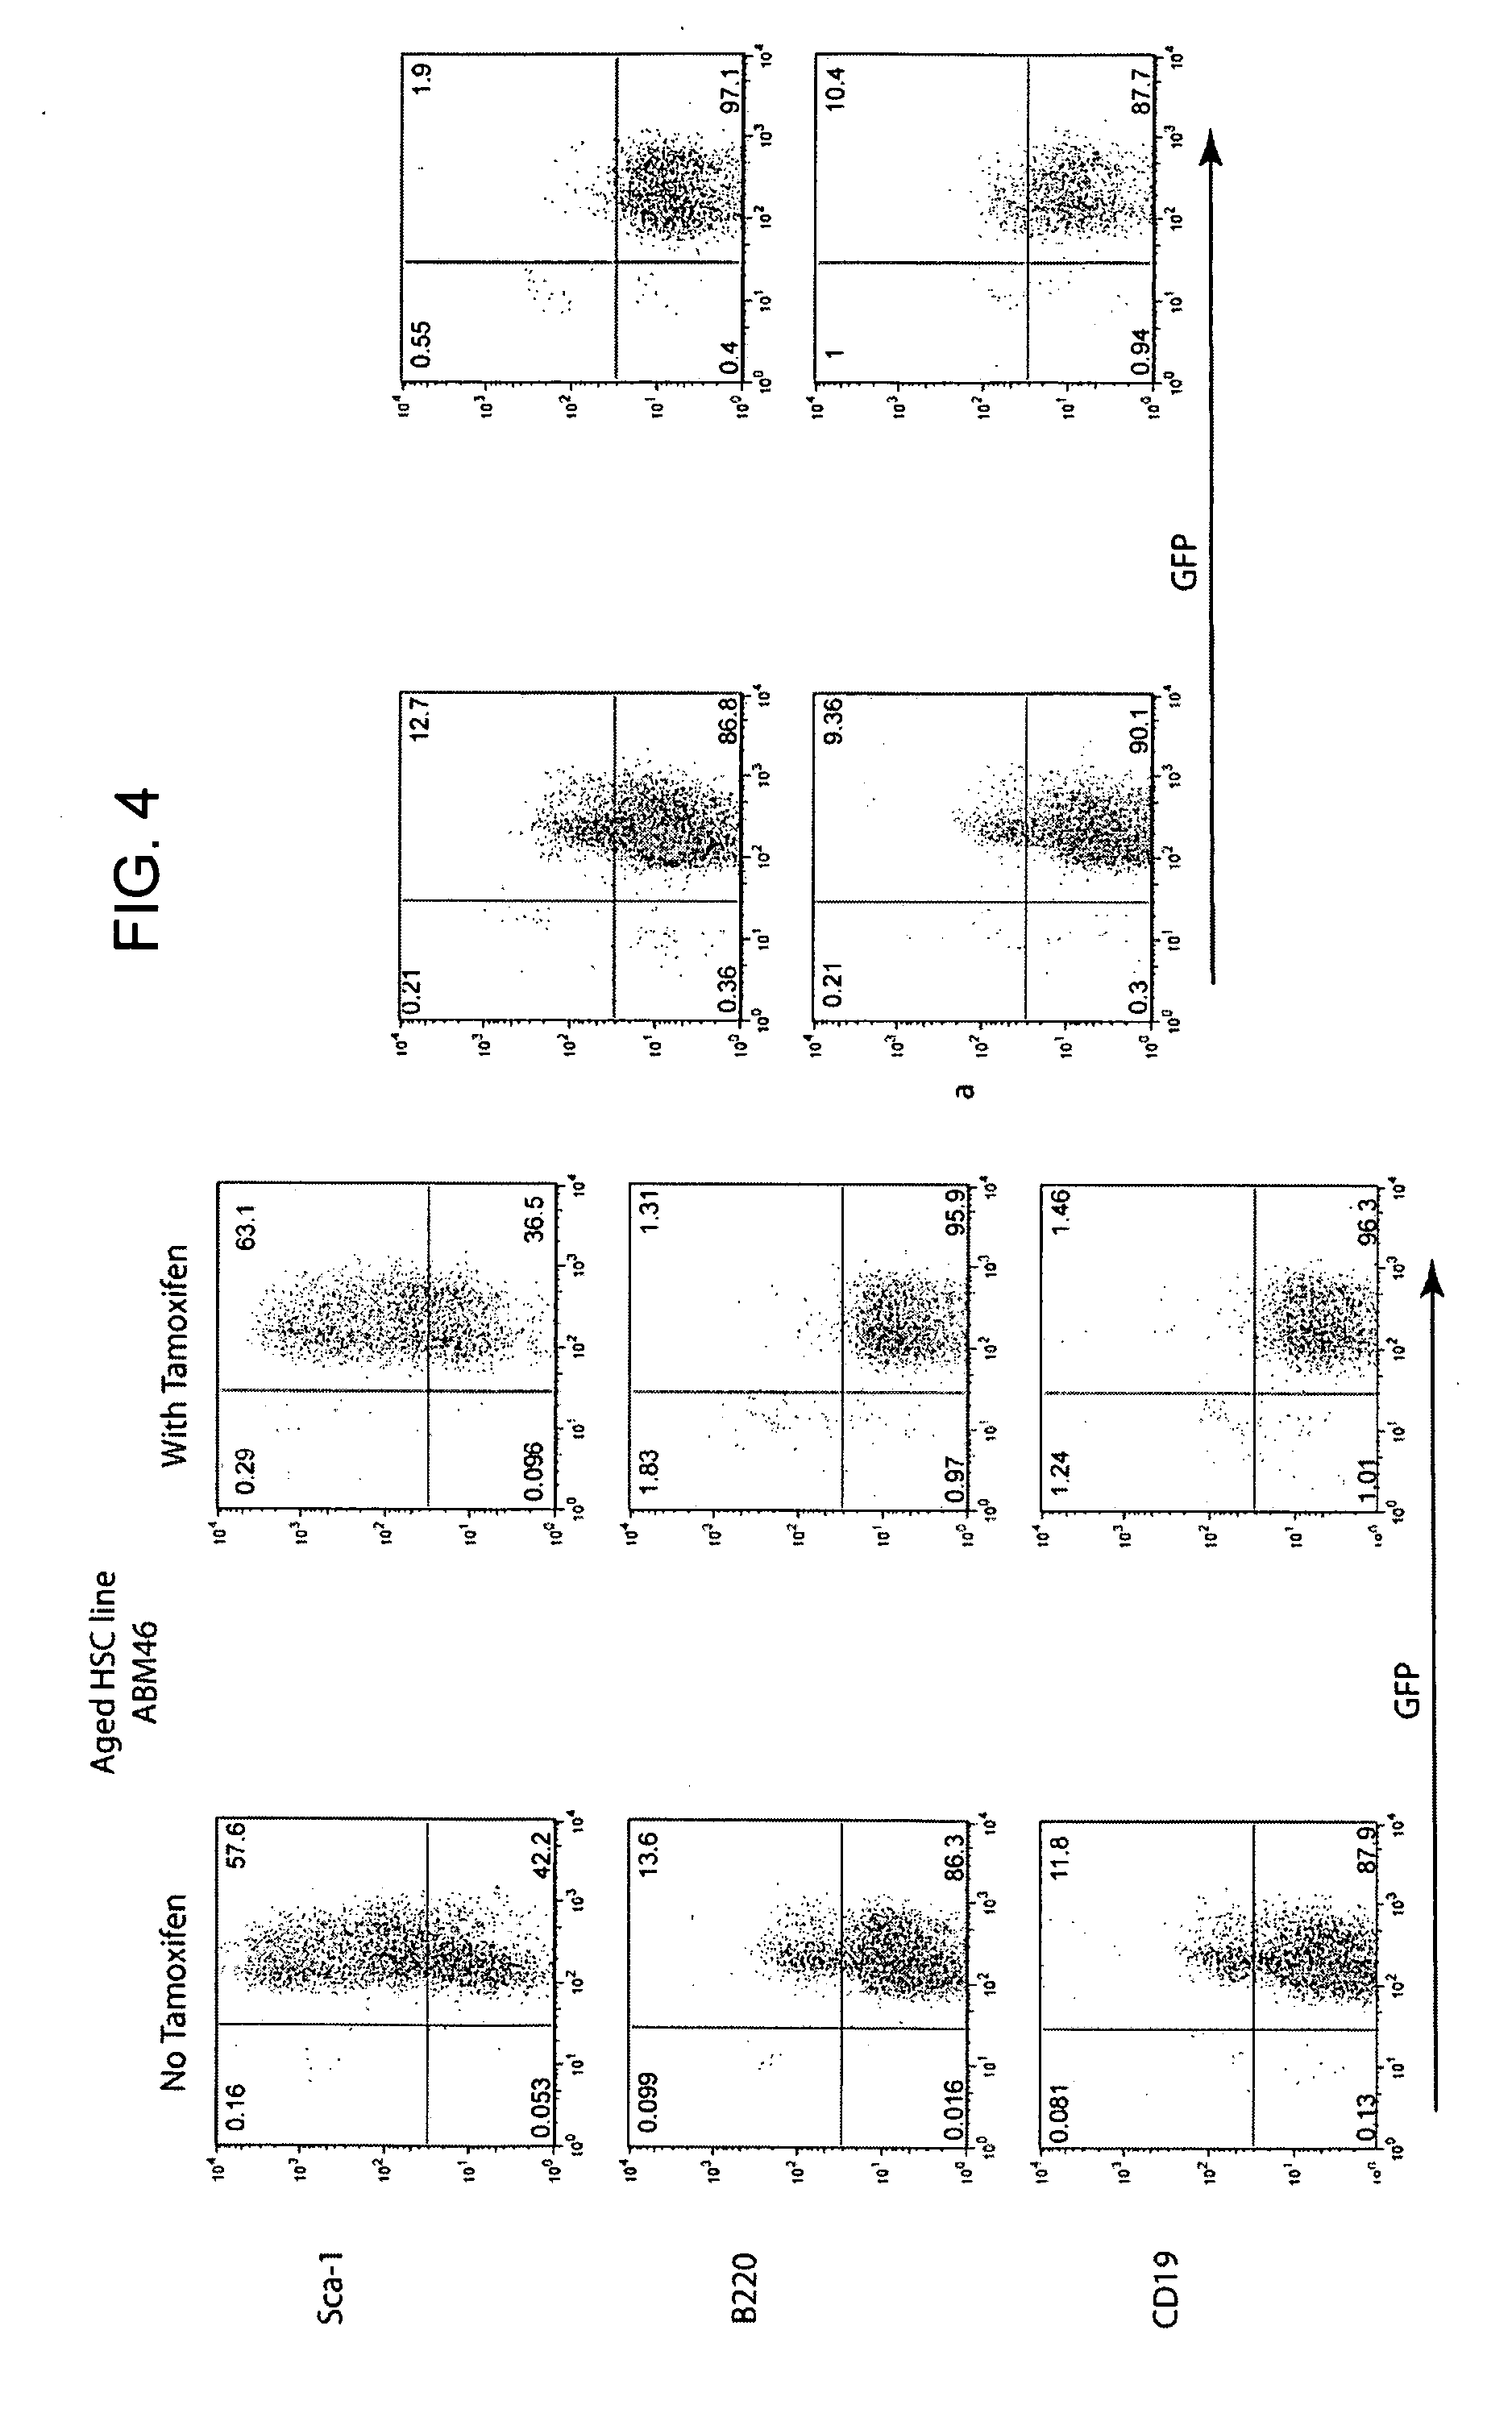 Conditionally immortalized long-term stem cells and methods of making and using such cells